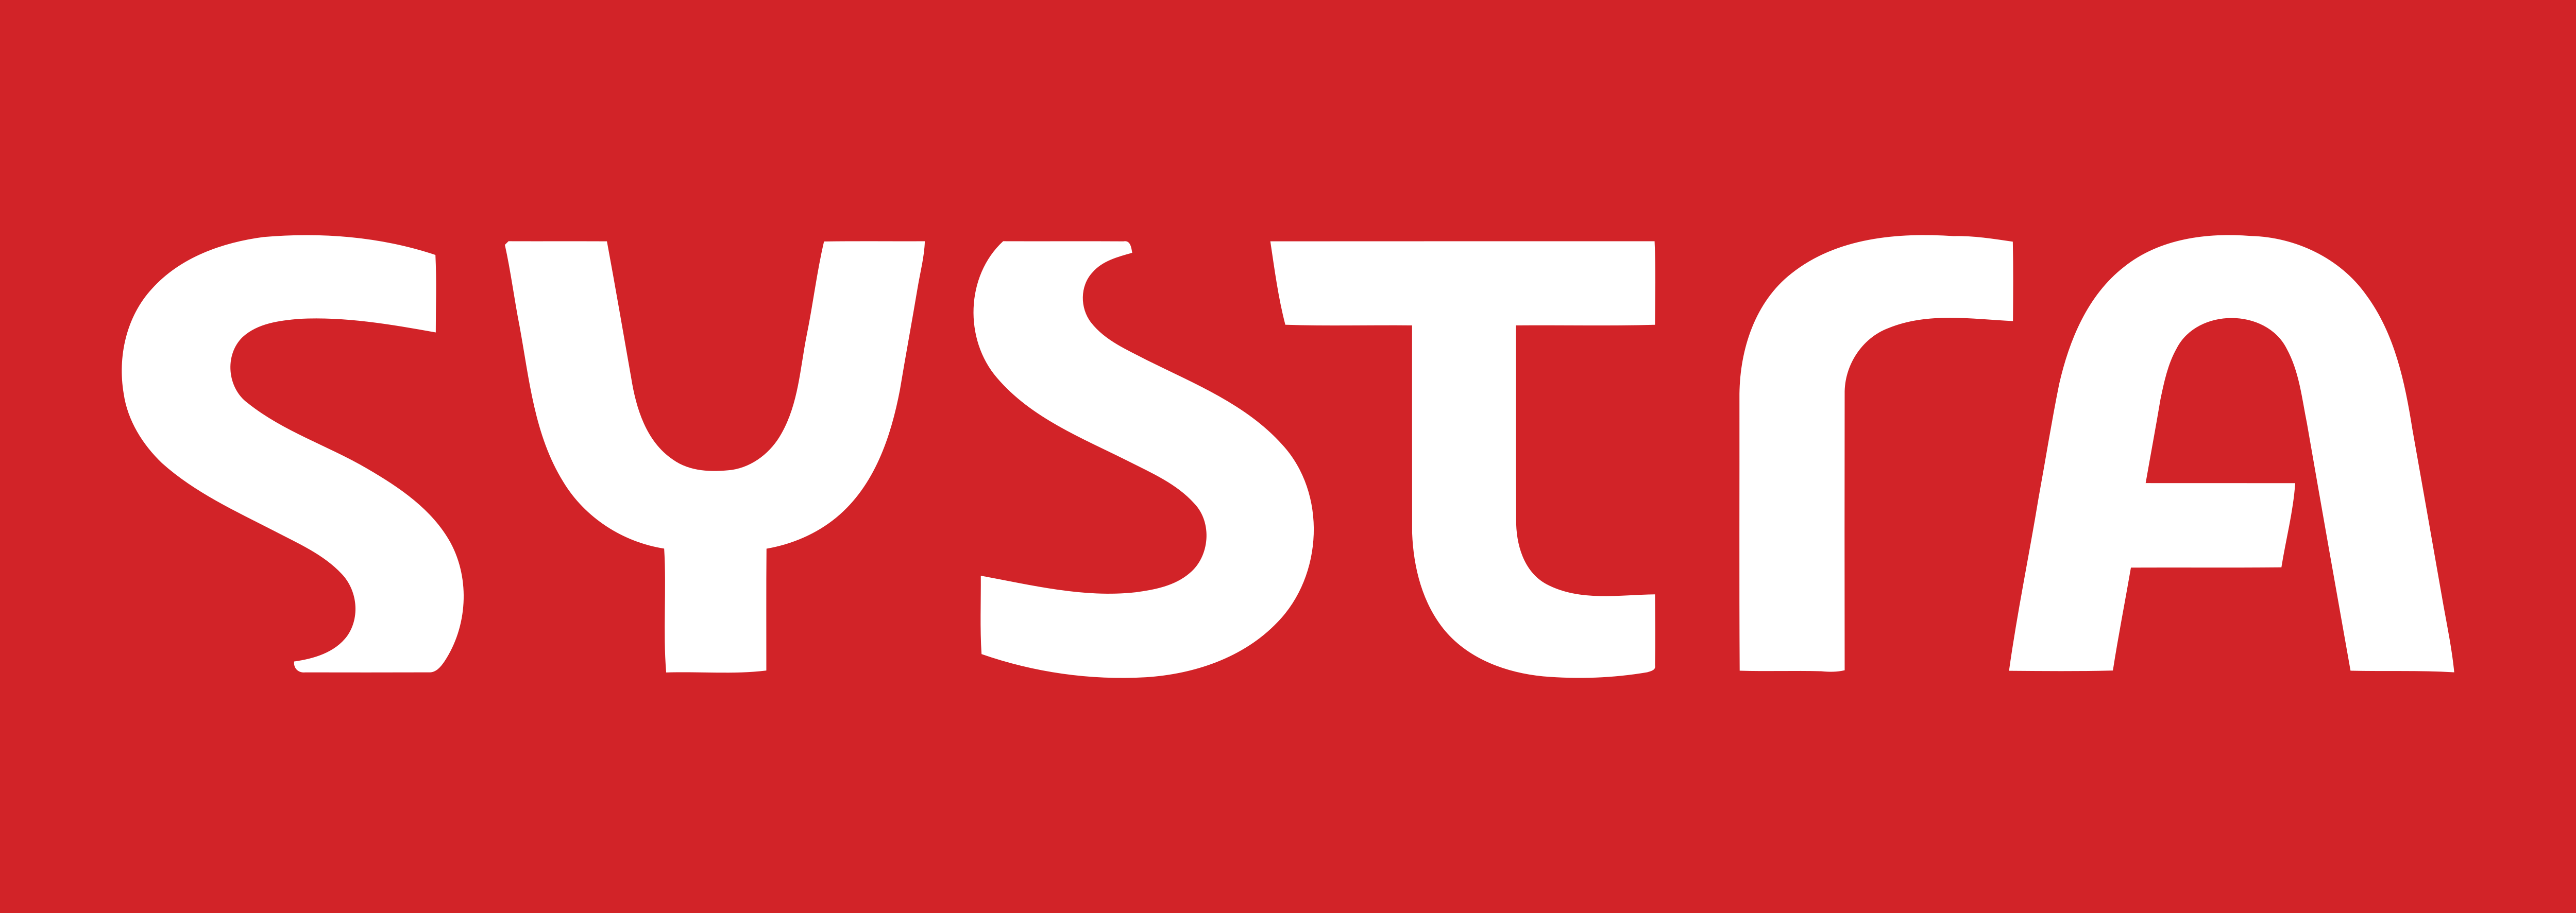 https://logos-download.com/wp-content/uploads/2018/09/Systra_Logo_red_background.png